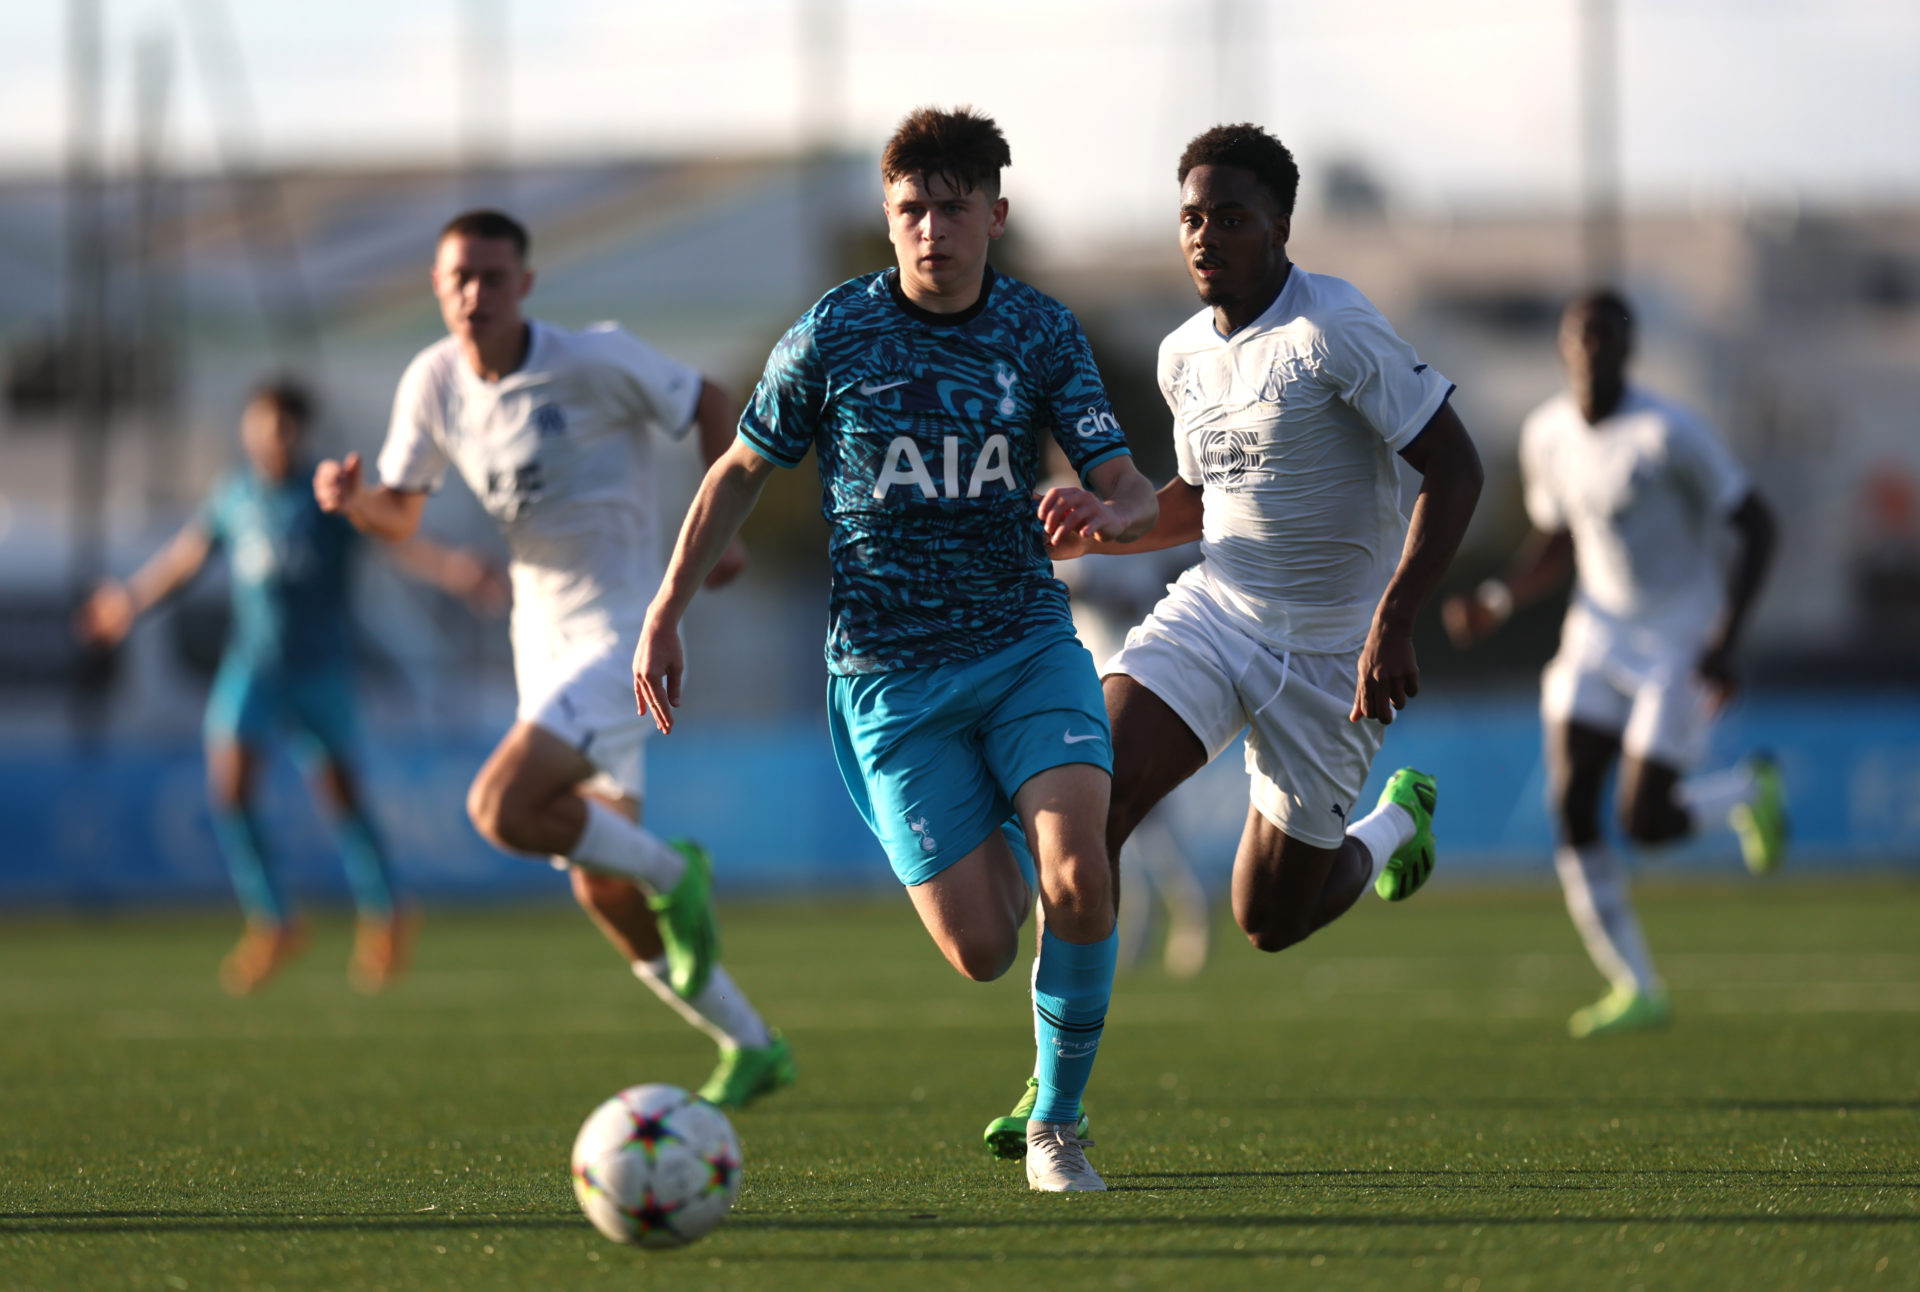 From U18s to under the spotlight – Mikey Moore & his meteoric rise at Spurs